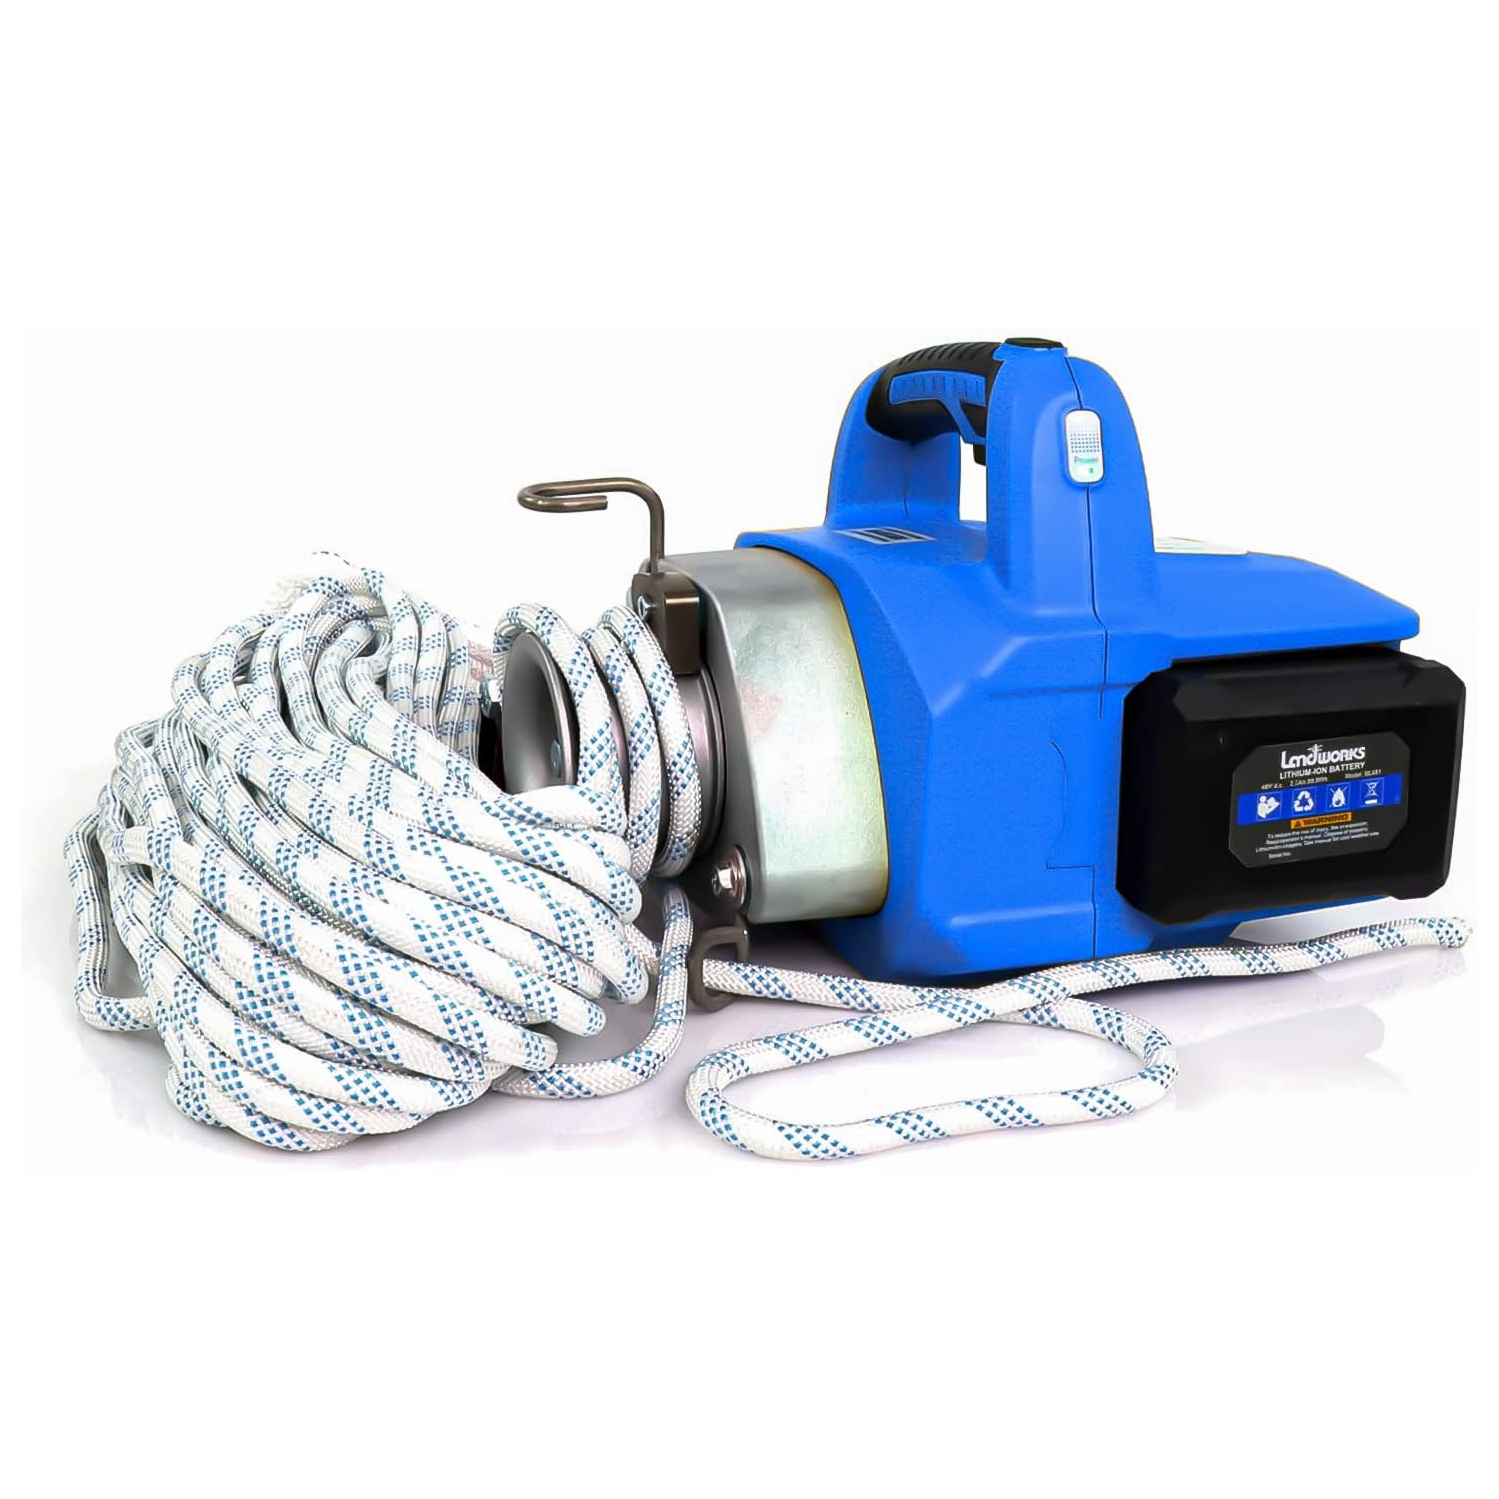 Landworks Portable Electric Towing Capstan Winch: Cordless Brushless Motor, Li-Ion Battery Powered, 500-1000 kg Max Pulling Force, Forestry, Hunting, Off-Road.